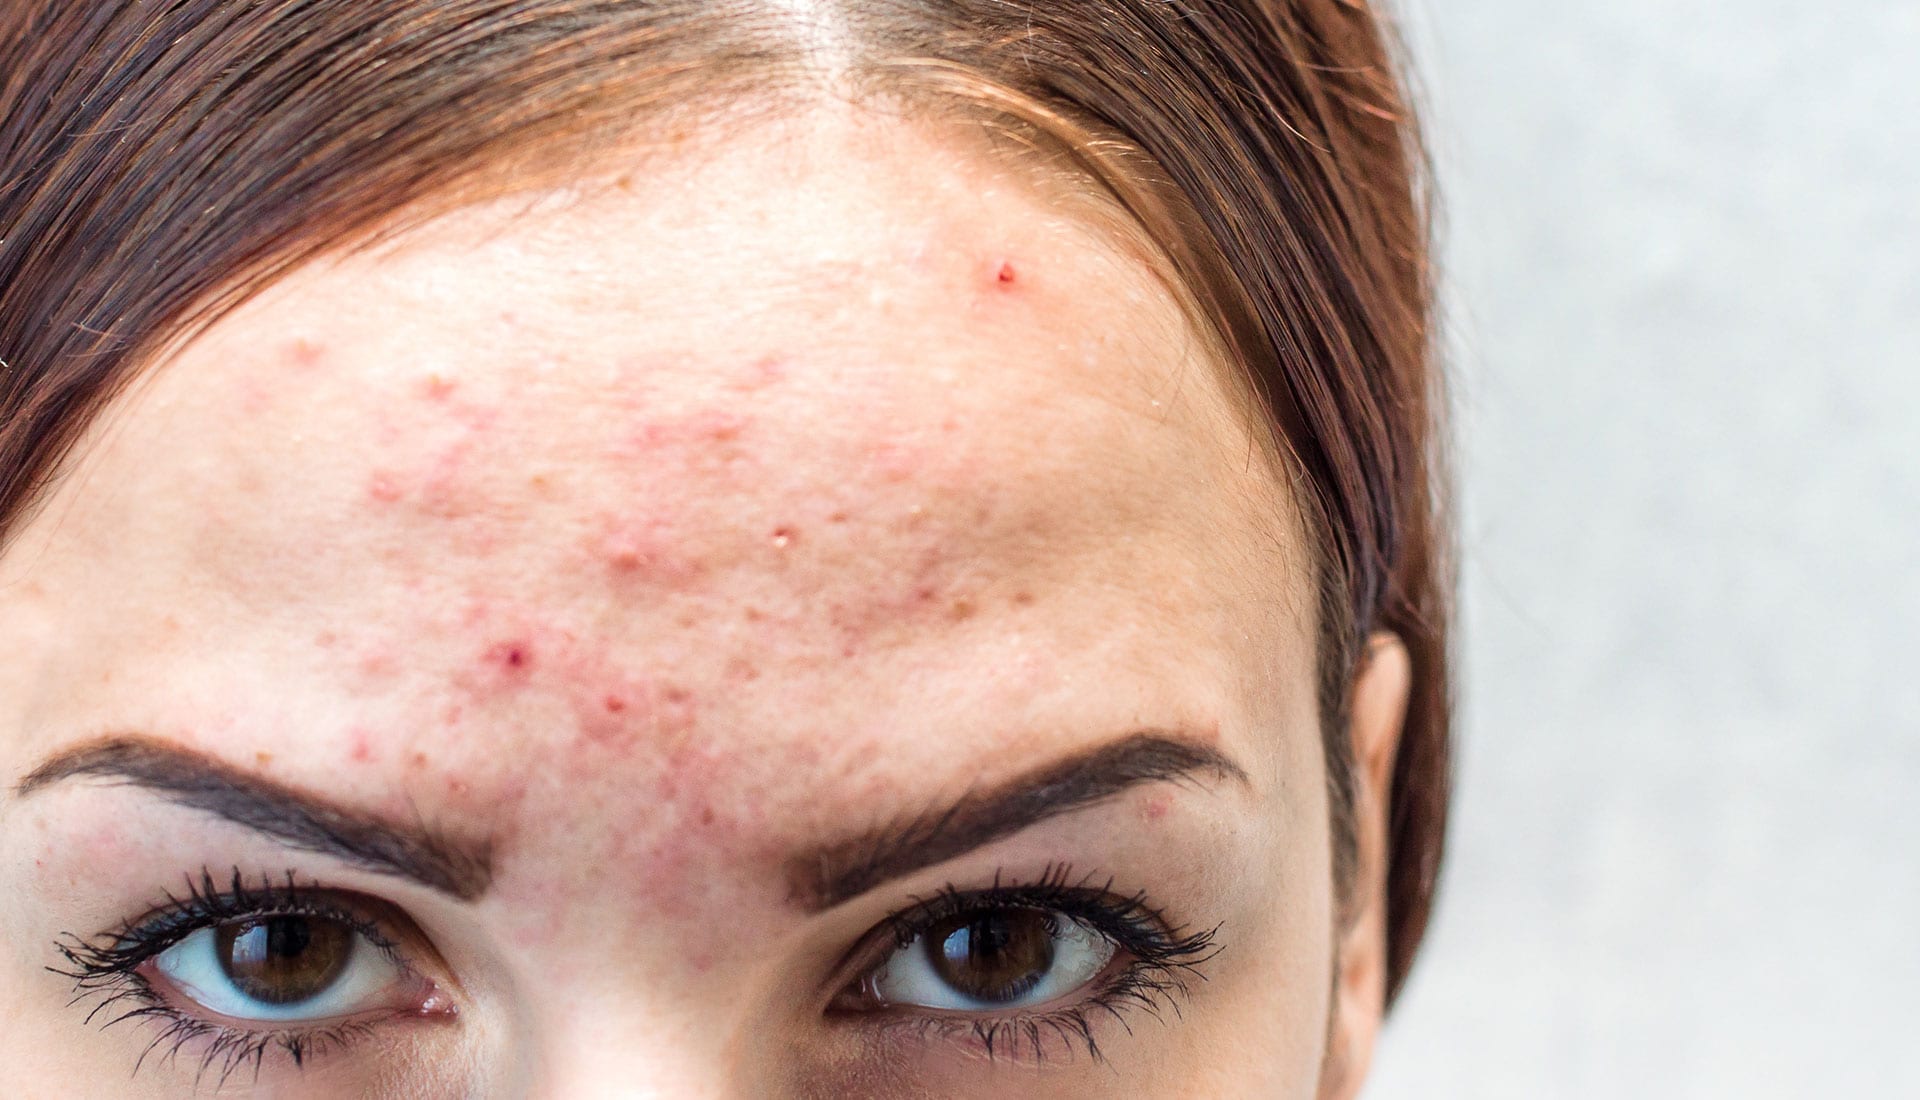 Acne Treatment | Solutions For Even The Worst Acne Cases